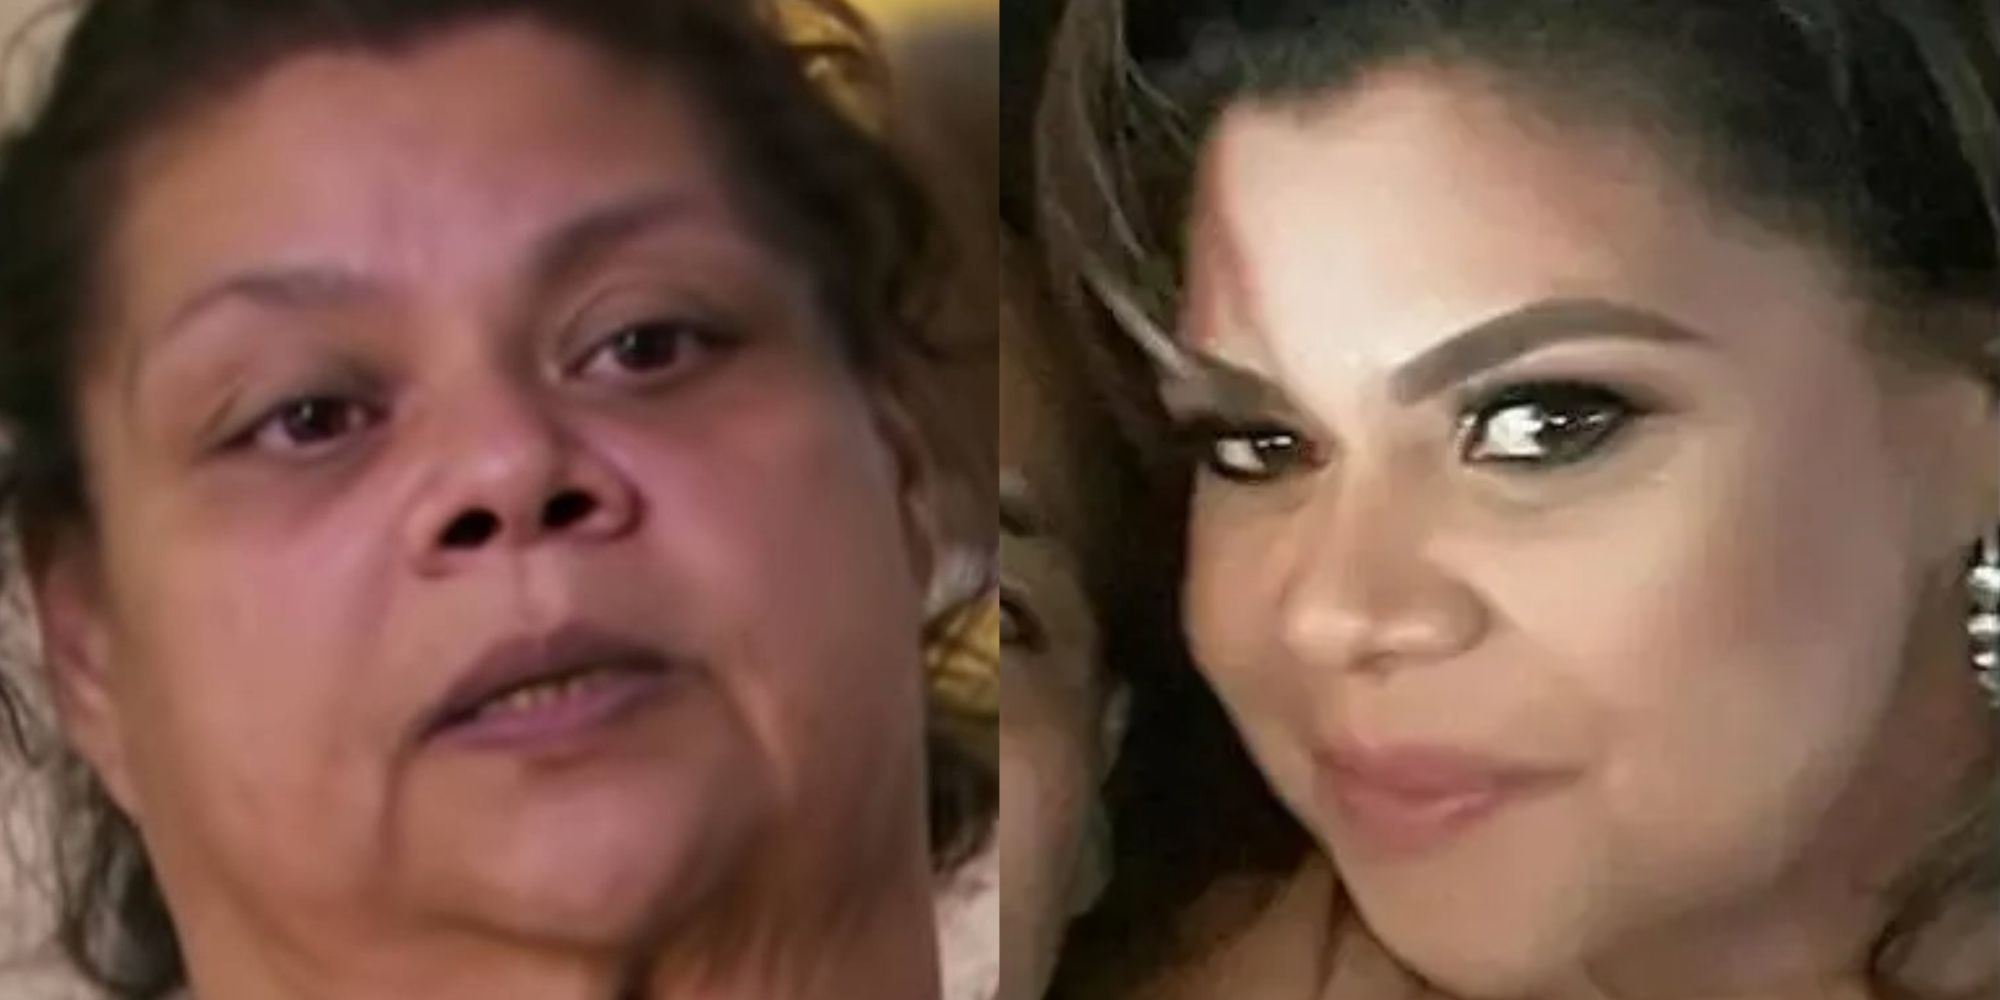 Split image of Lupe Samano in 2016 and a Facebook post of her smiling in 2019